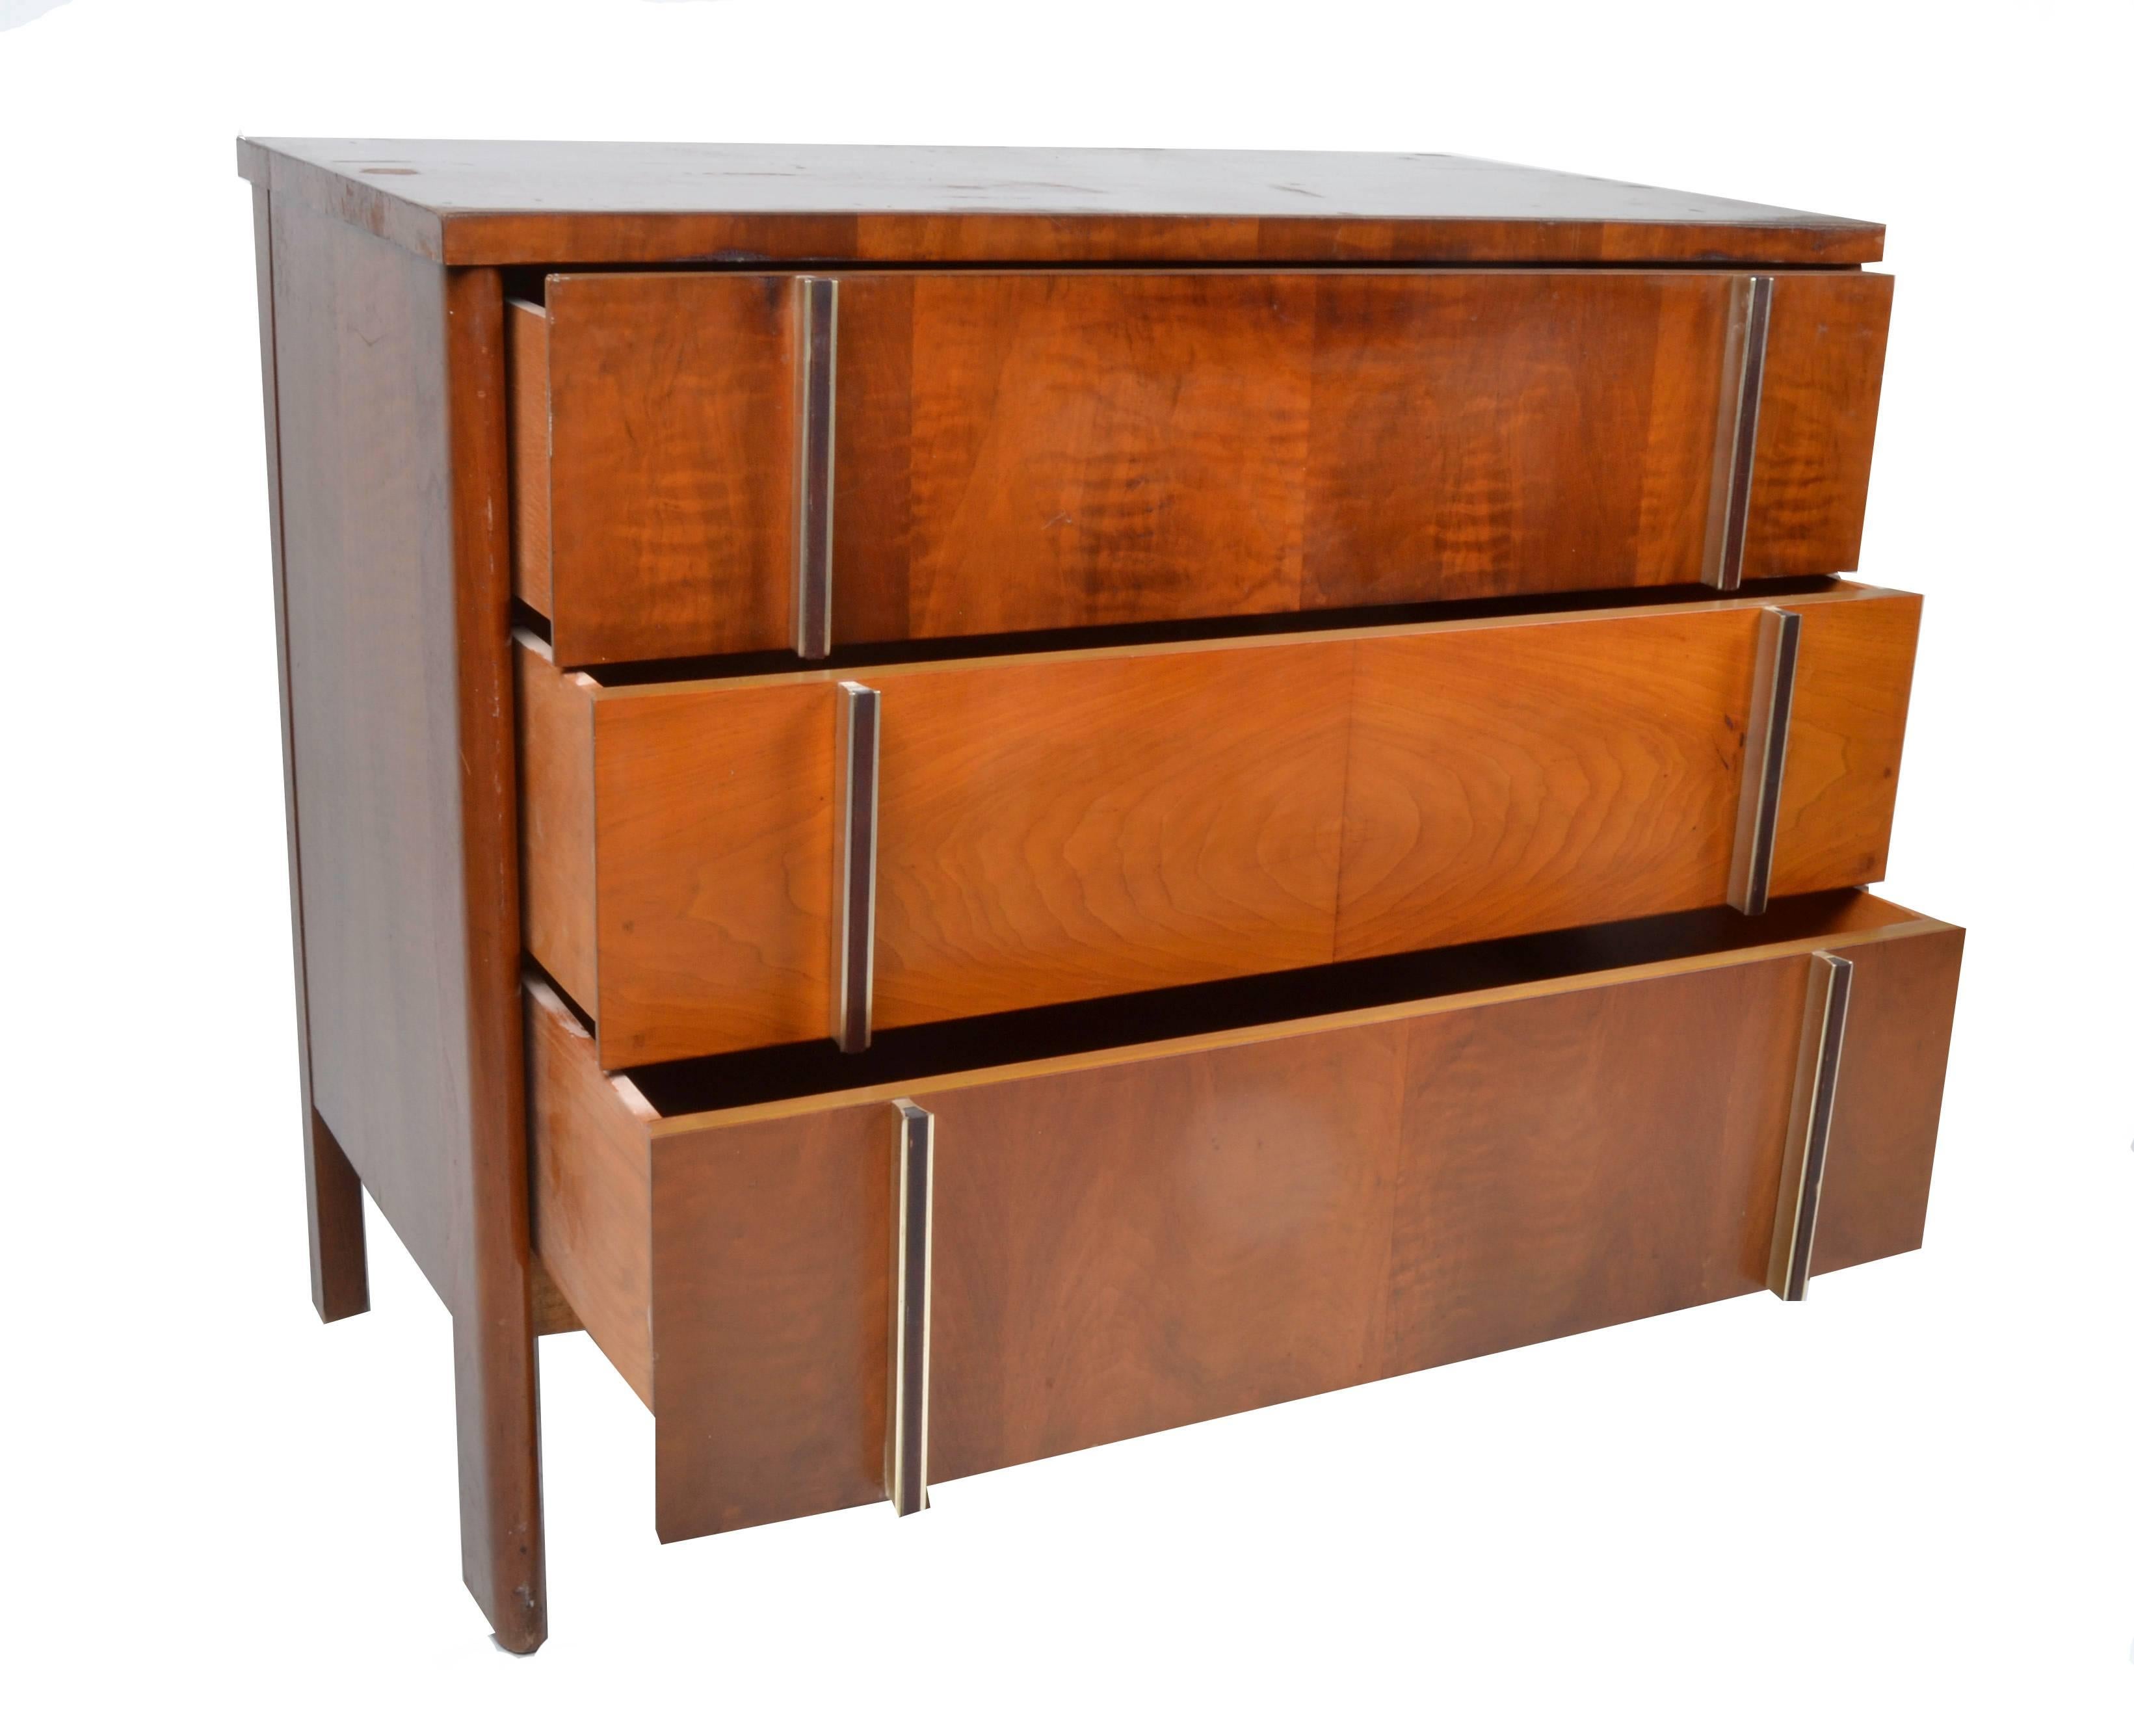 Mid-Century Modern Dresser or Chest of drawers designed by Dale Ford for John Widdicomb.
Features 3 drawers for lots of storage space.
Makers Brandmark inside the drawers.
 